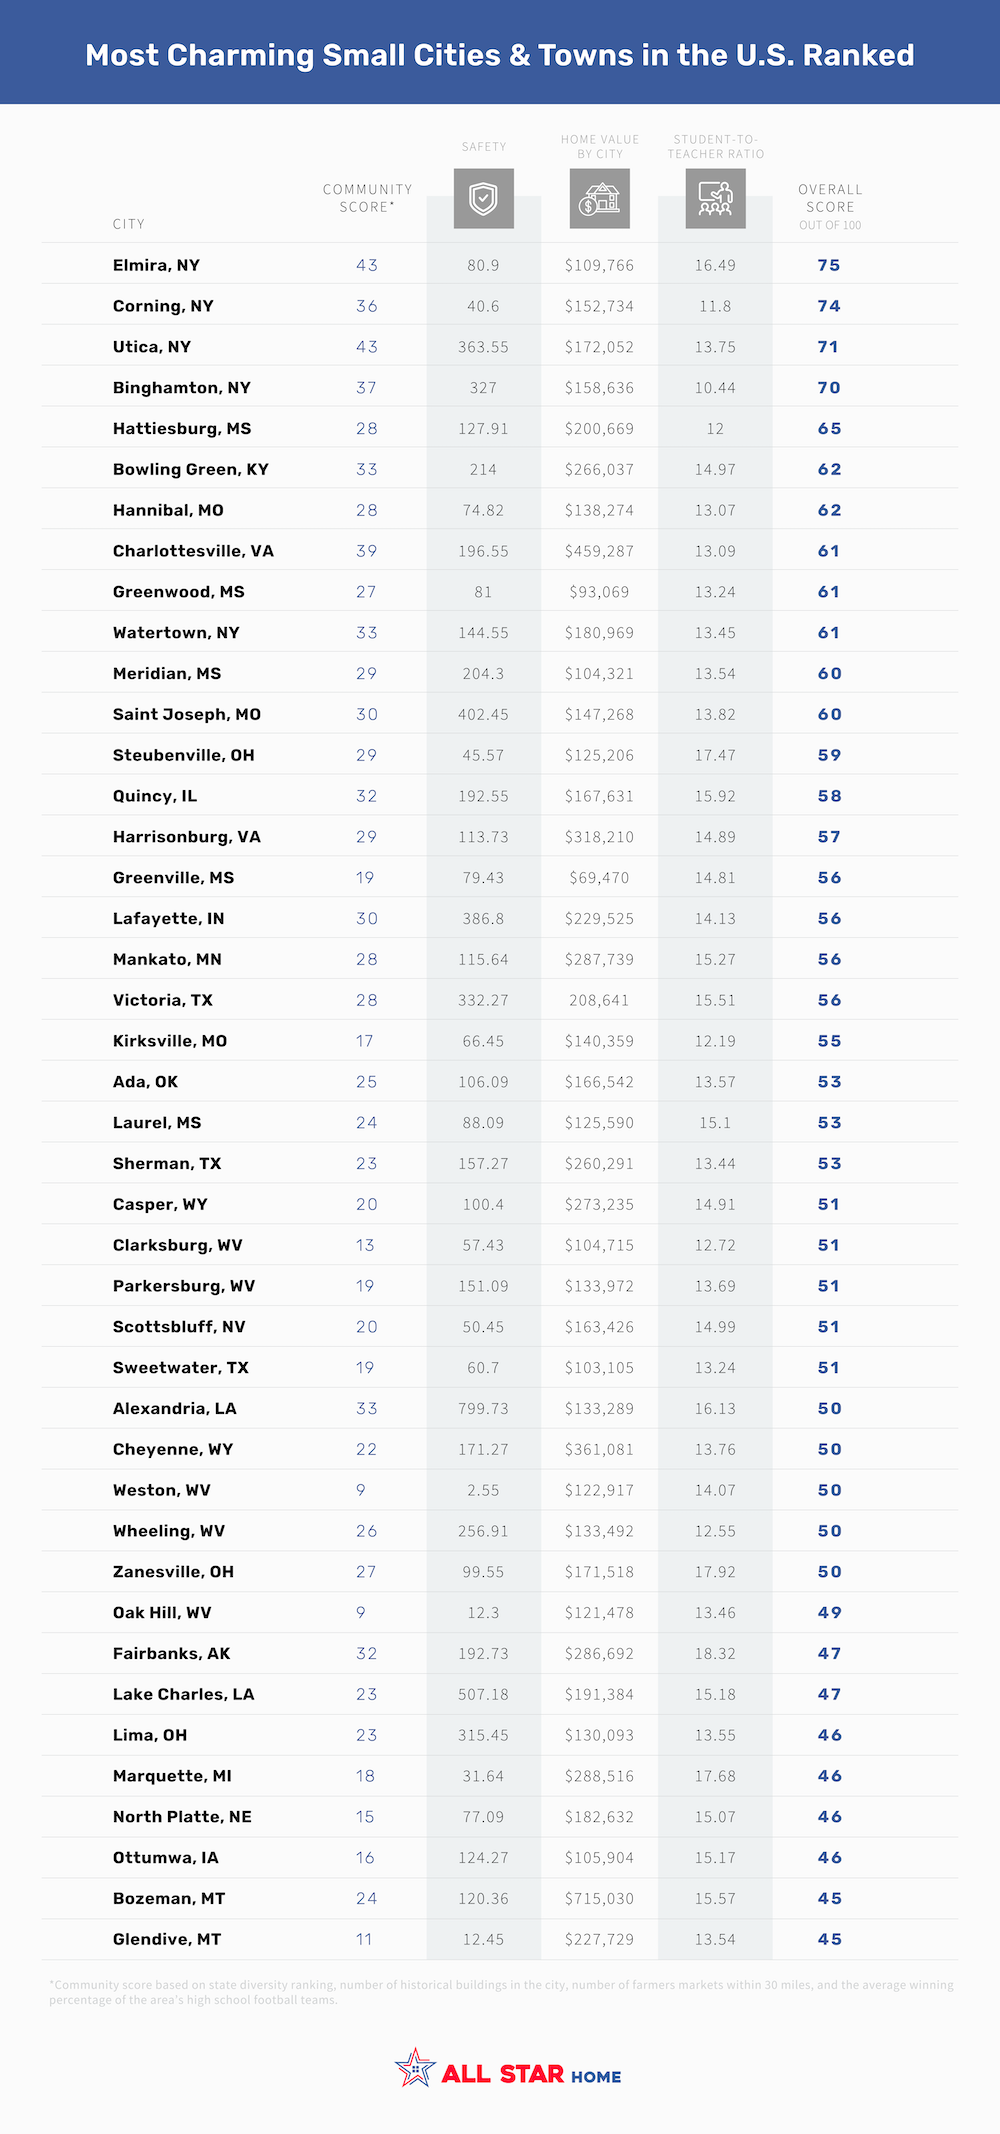 Table ranking the top 30 most charming cities and towns in America - report by allstarhome.com